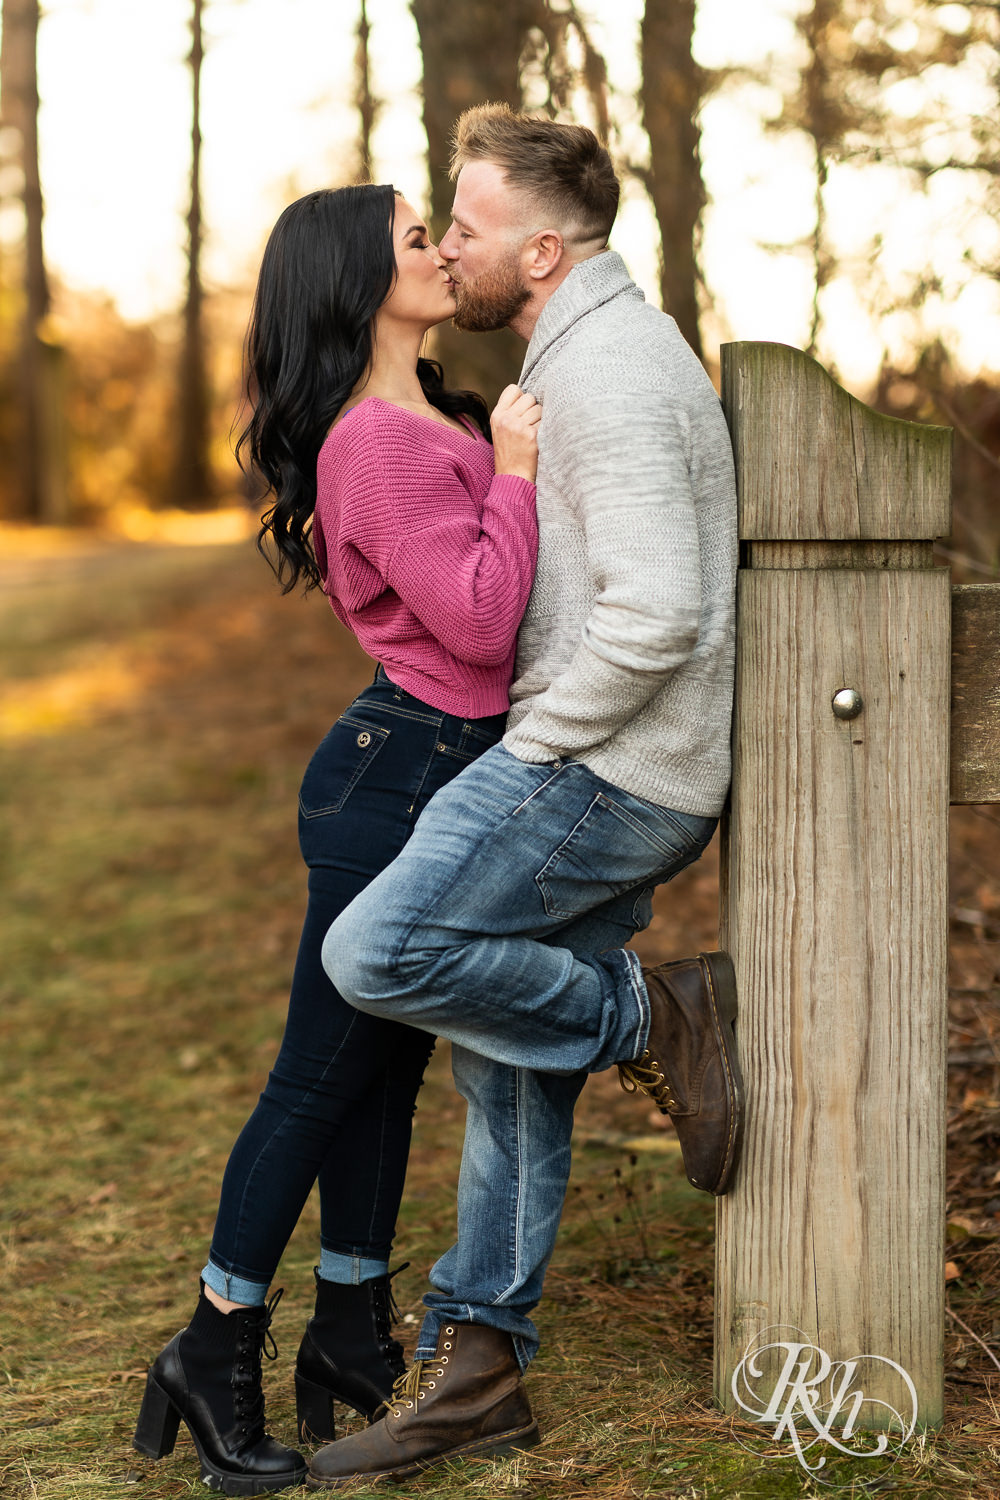 Man in sweater and jeans lifts and woman in pink sweater and jeans kiss at Lebanon Hills Regional Park in Eagan, Minnesota.